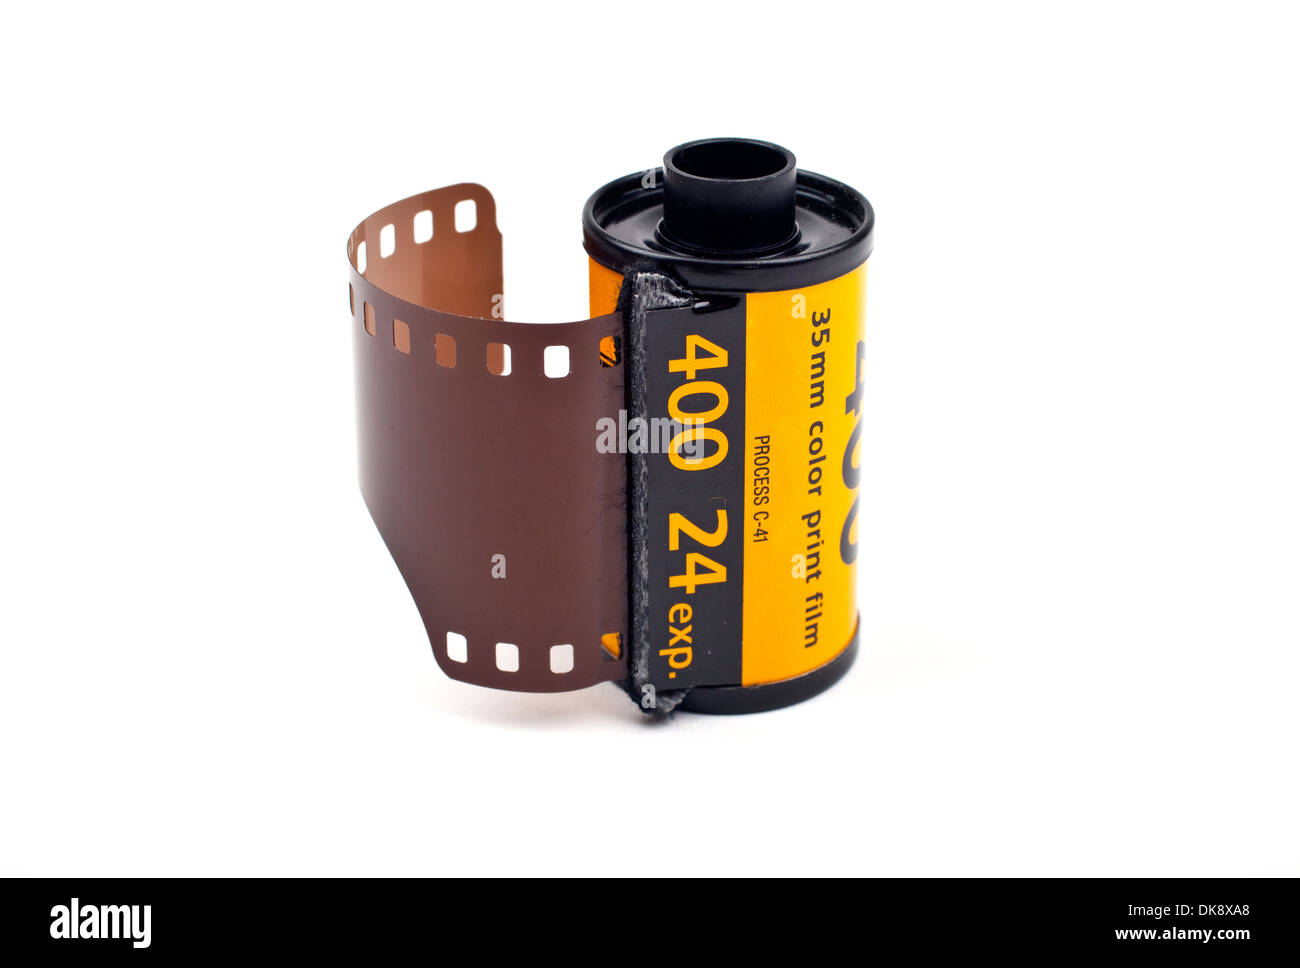 A roll of Photographic film on a white background. Stock Photo